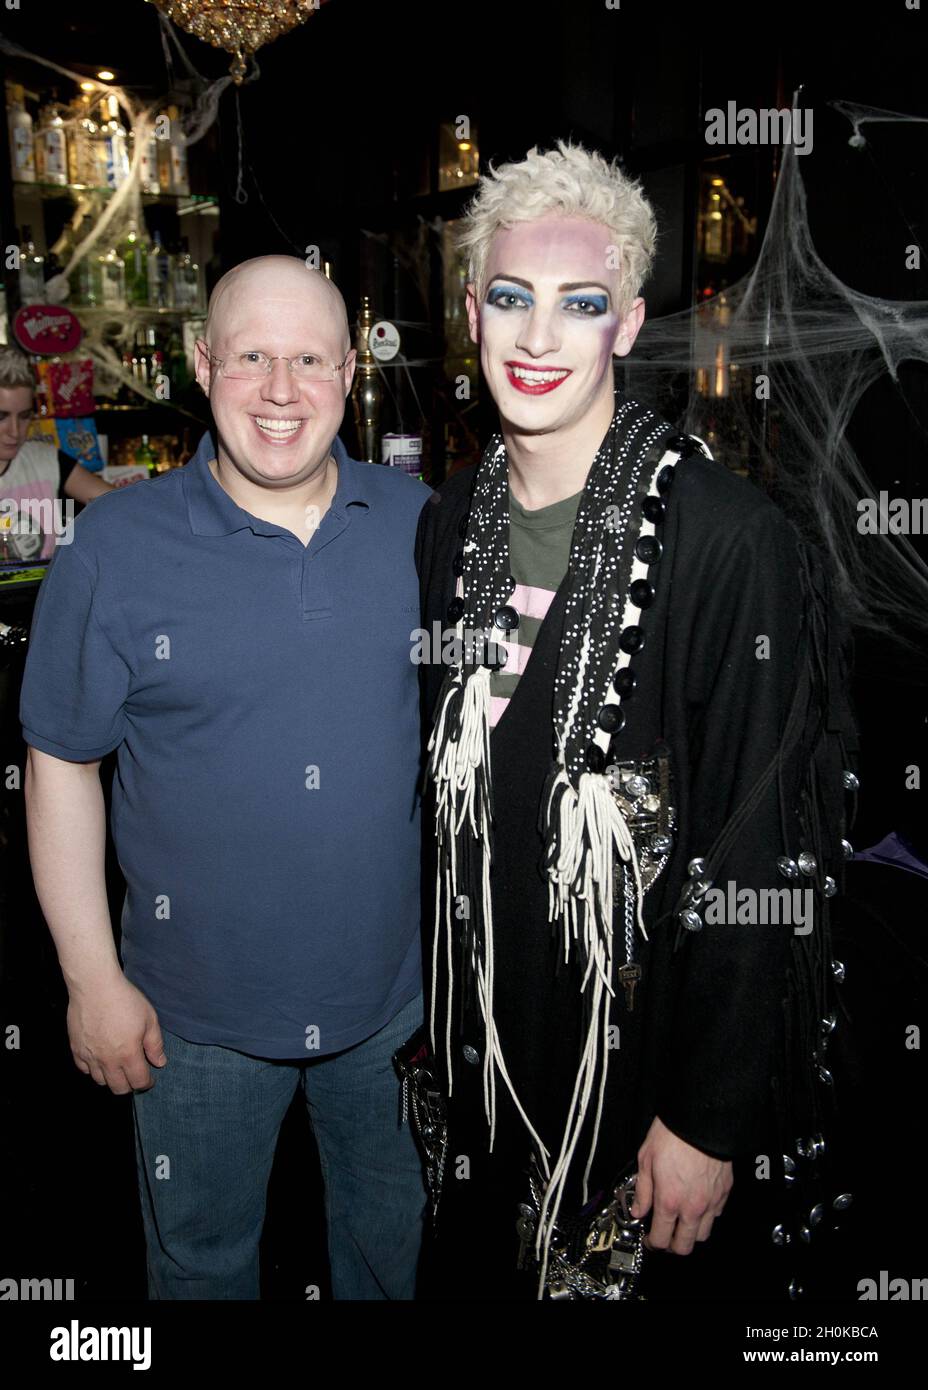 Matt Lucas and Mathew Rowland (Boy George) attend the Halloween performance of Taboo at the Brixton Club House in London. Stock Photo